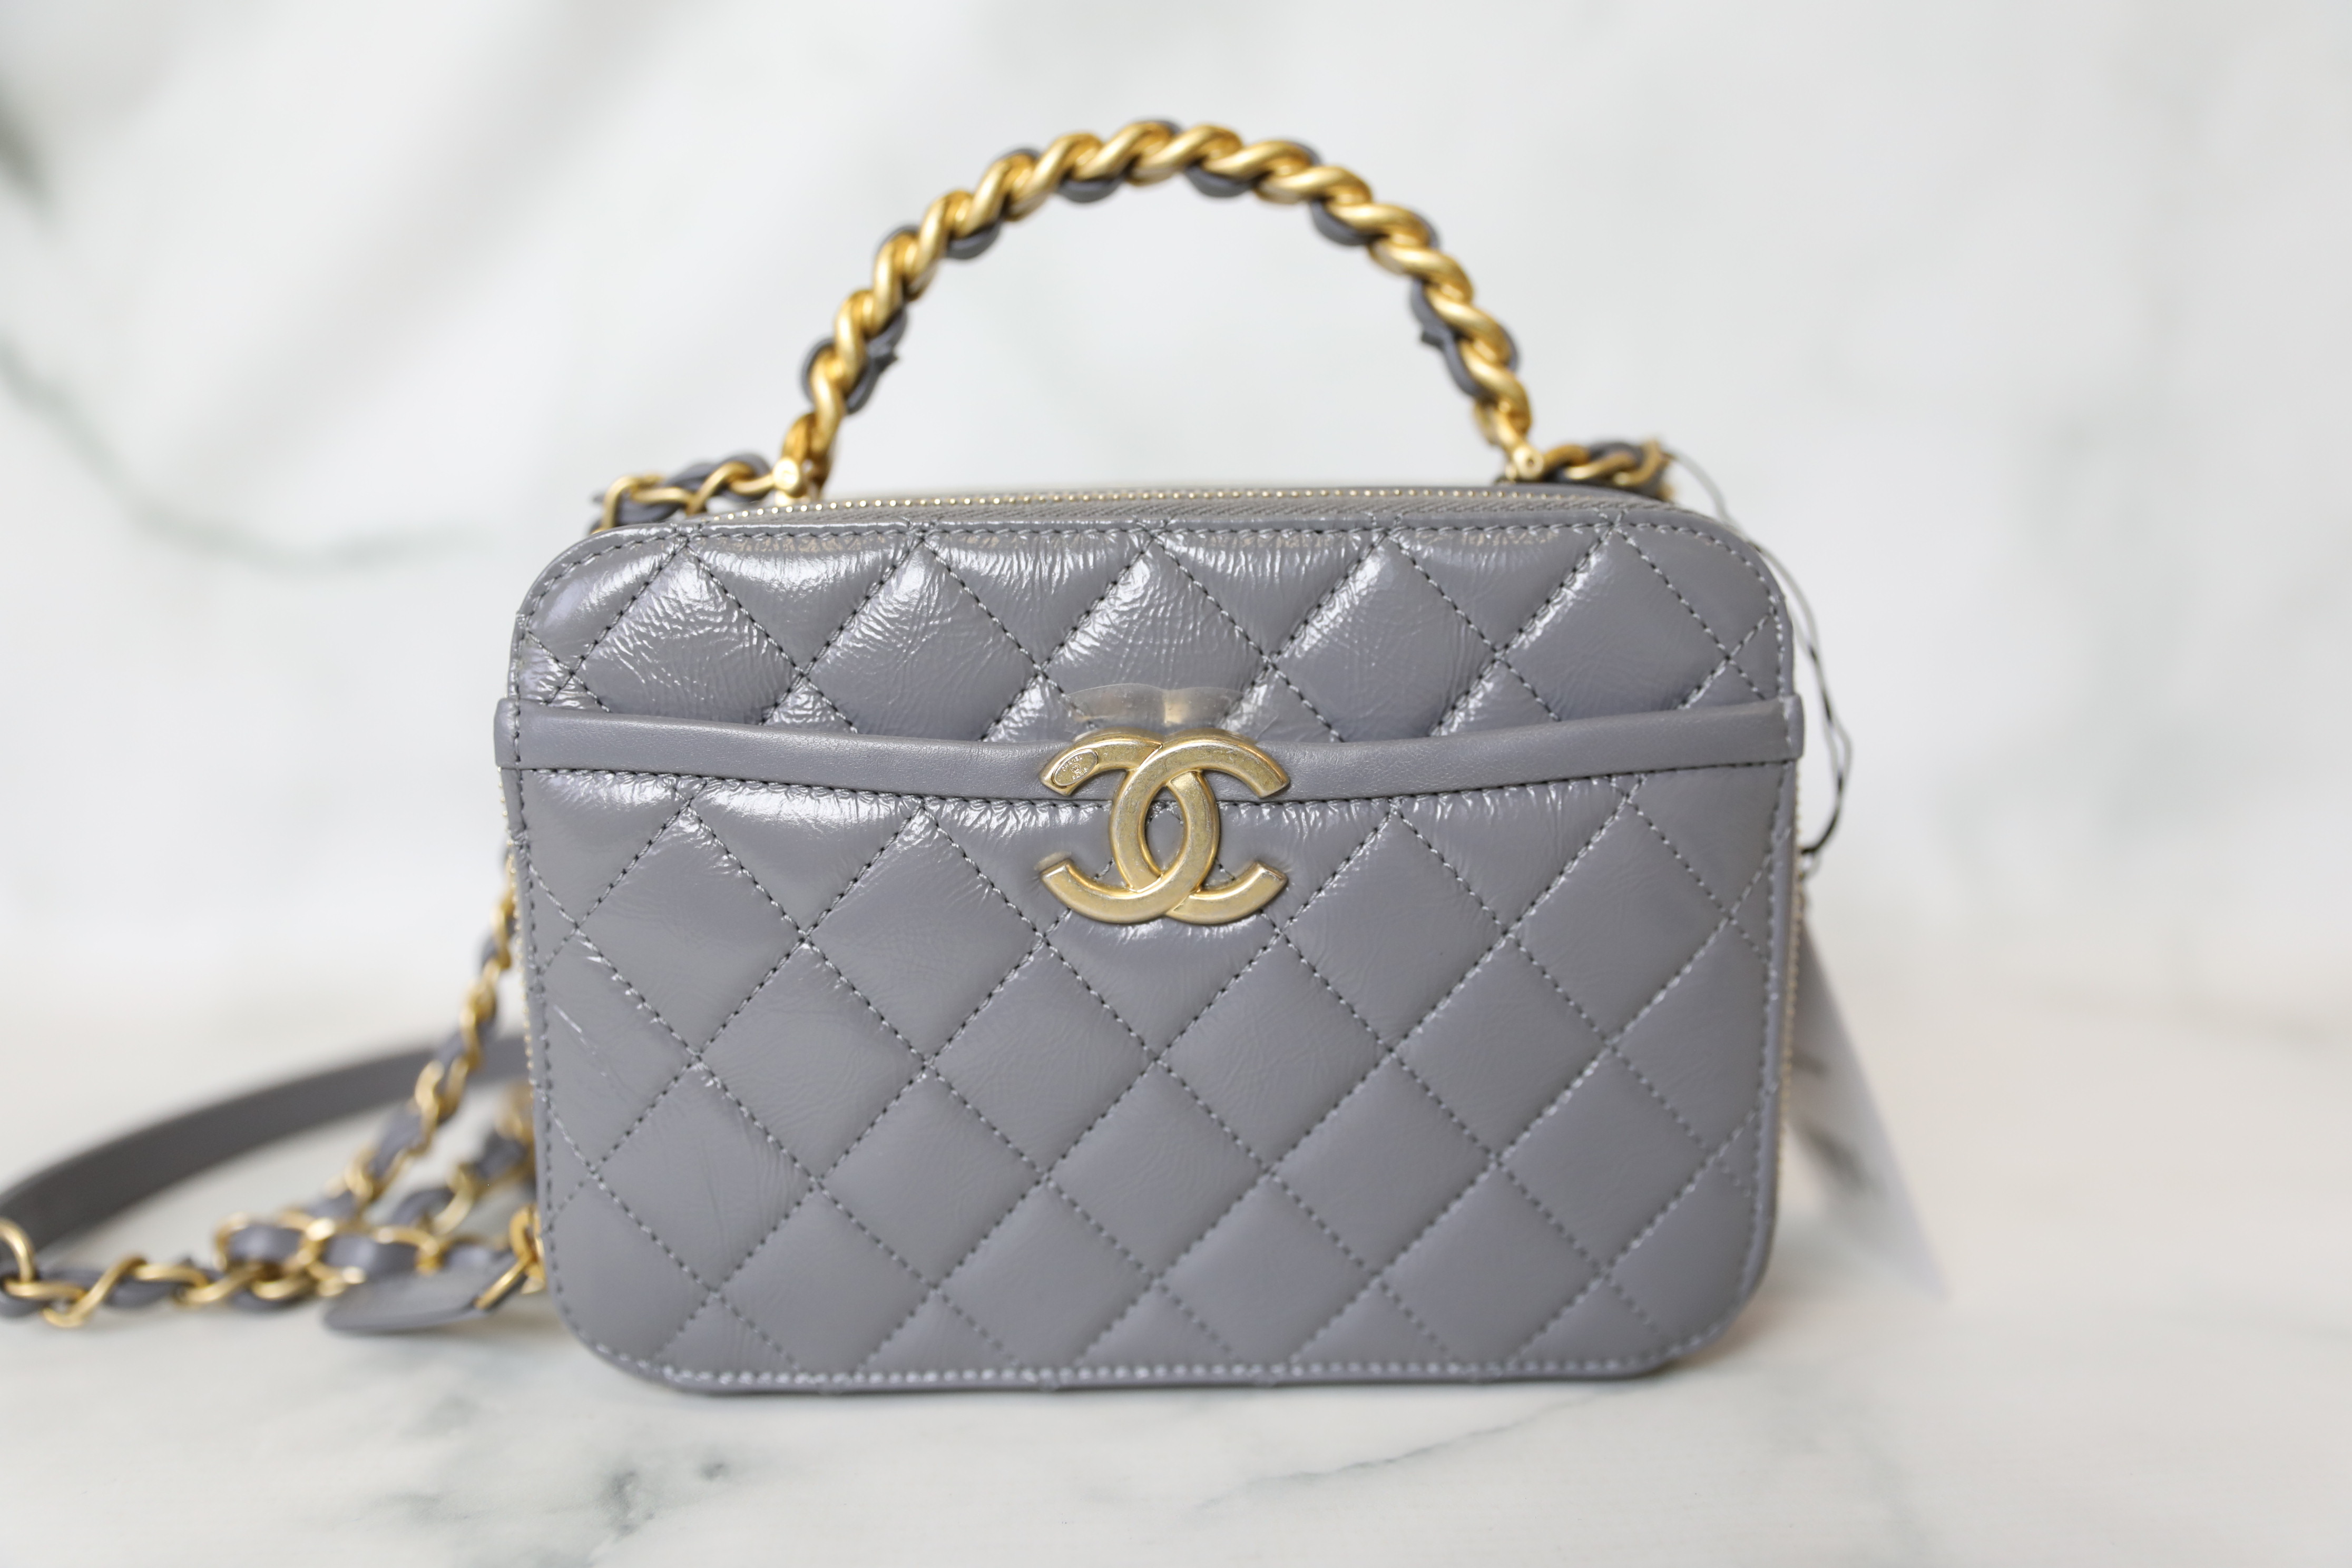 Chanel Vanity with Top Handle, Grey Calfskin with Gold Hardware, Preowned  in Box WA001